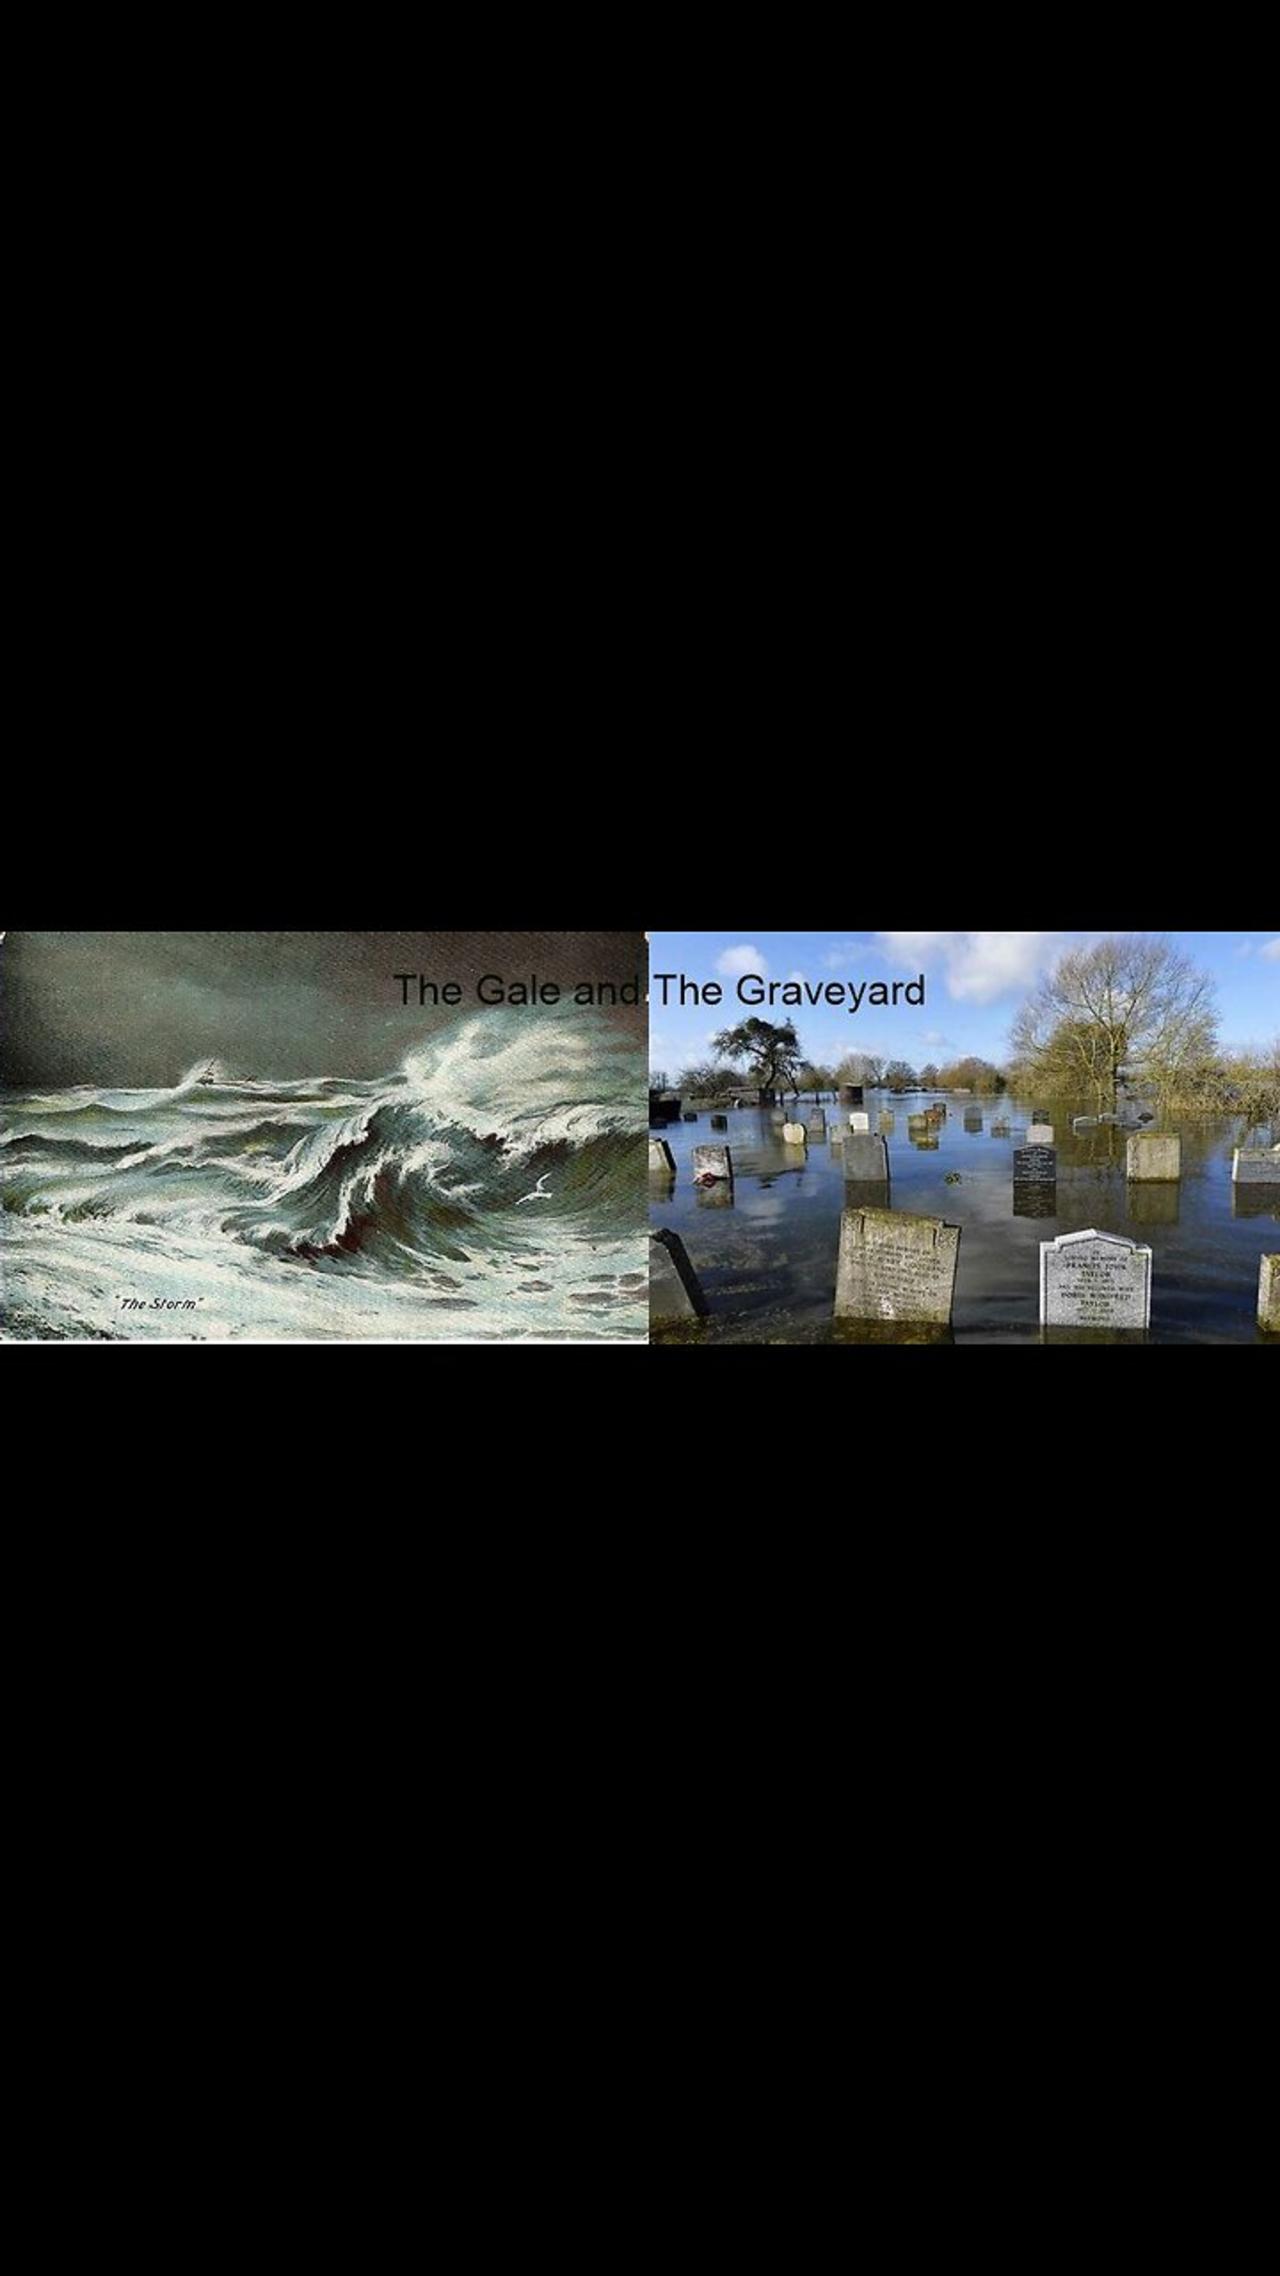 The Gale and The Graveyard